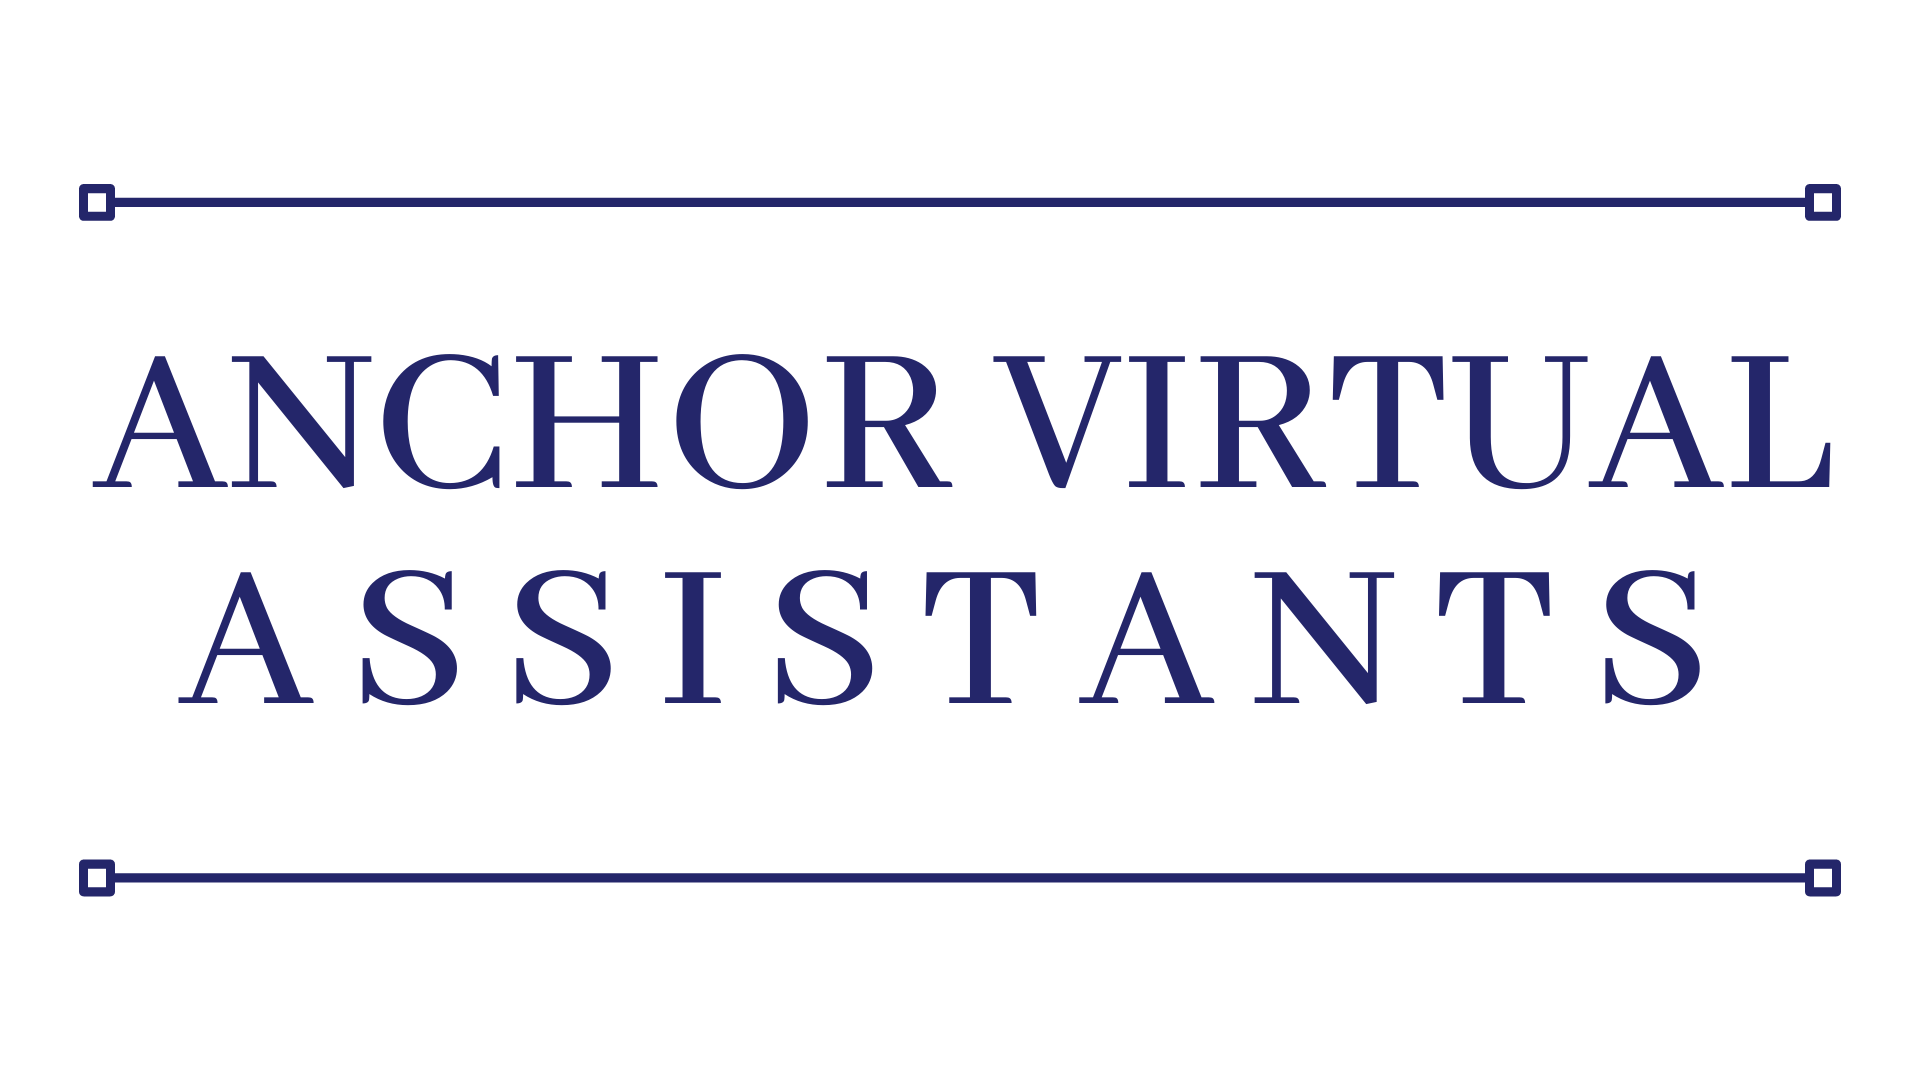 Anchor Virtual Assistants in logo form with navy blue letters